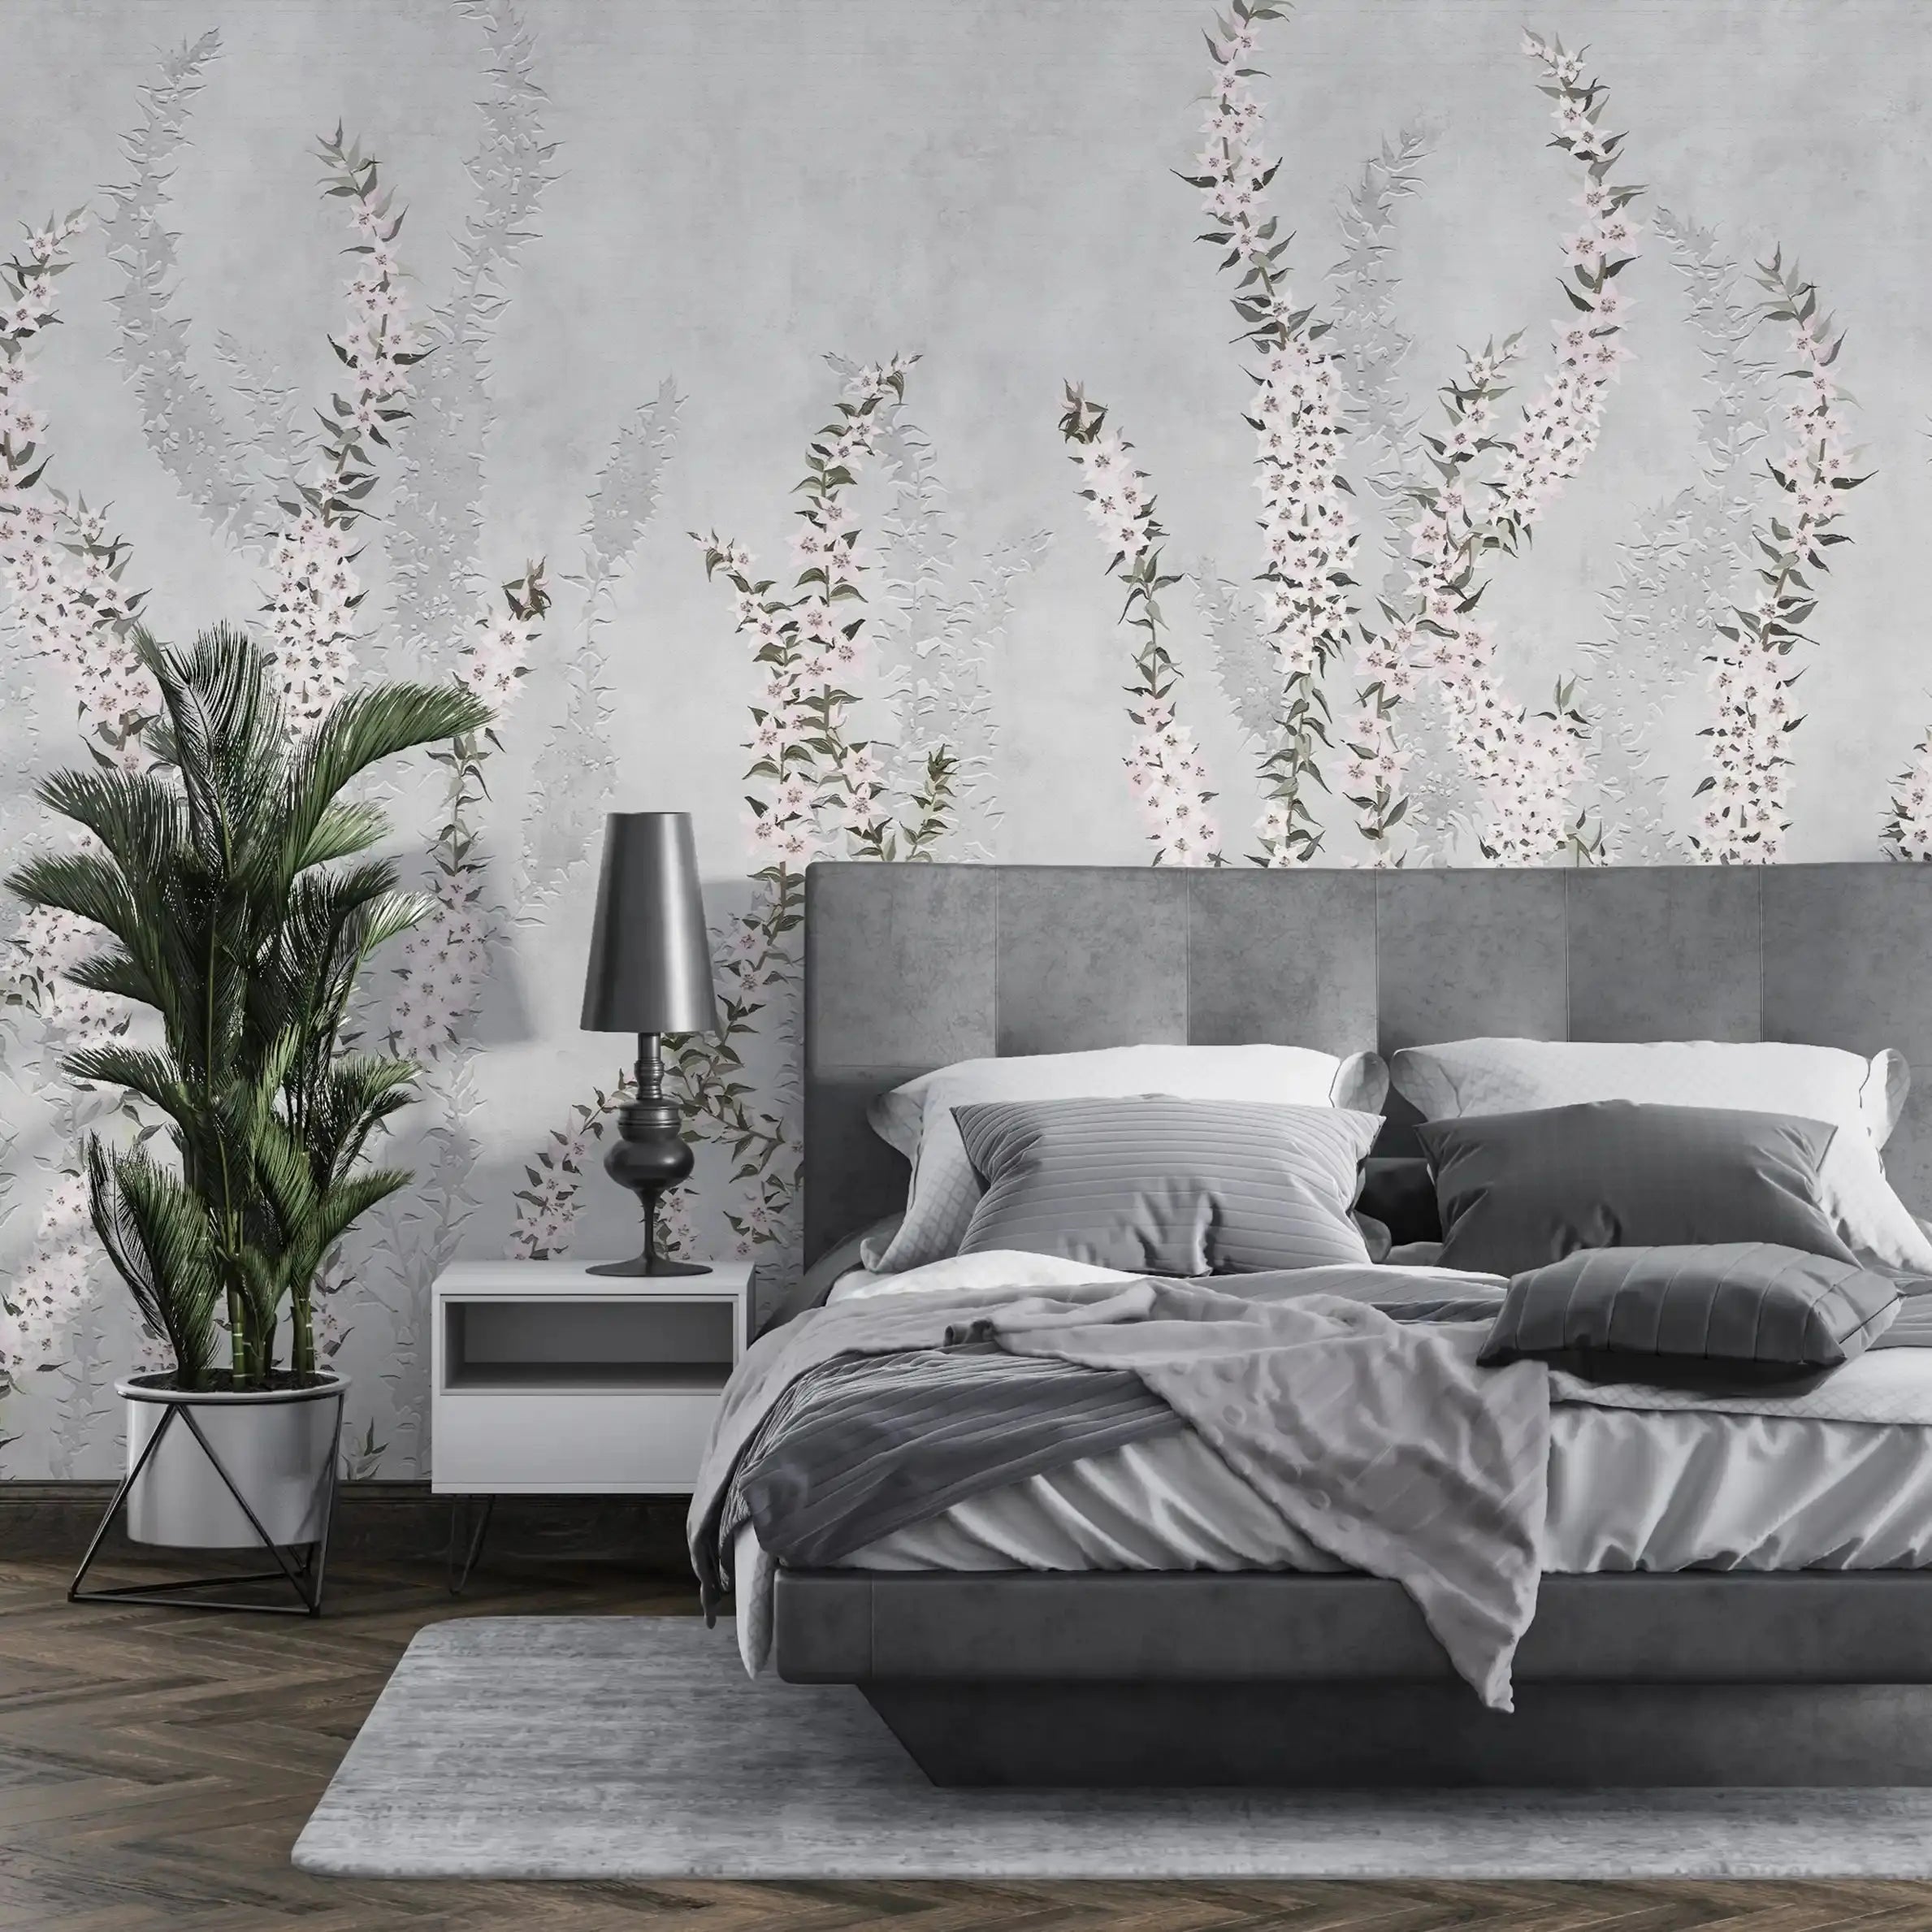 3023-D / Modern Grey Paisley Wallpaper, Adhesive Peel and Stick, Temporary Wallpaper for Home Decor - Artevella